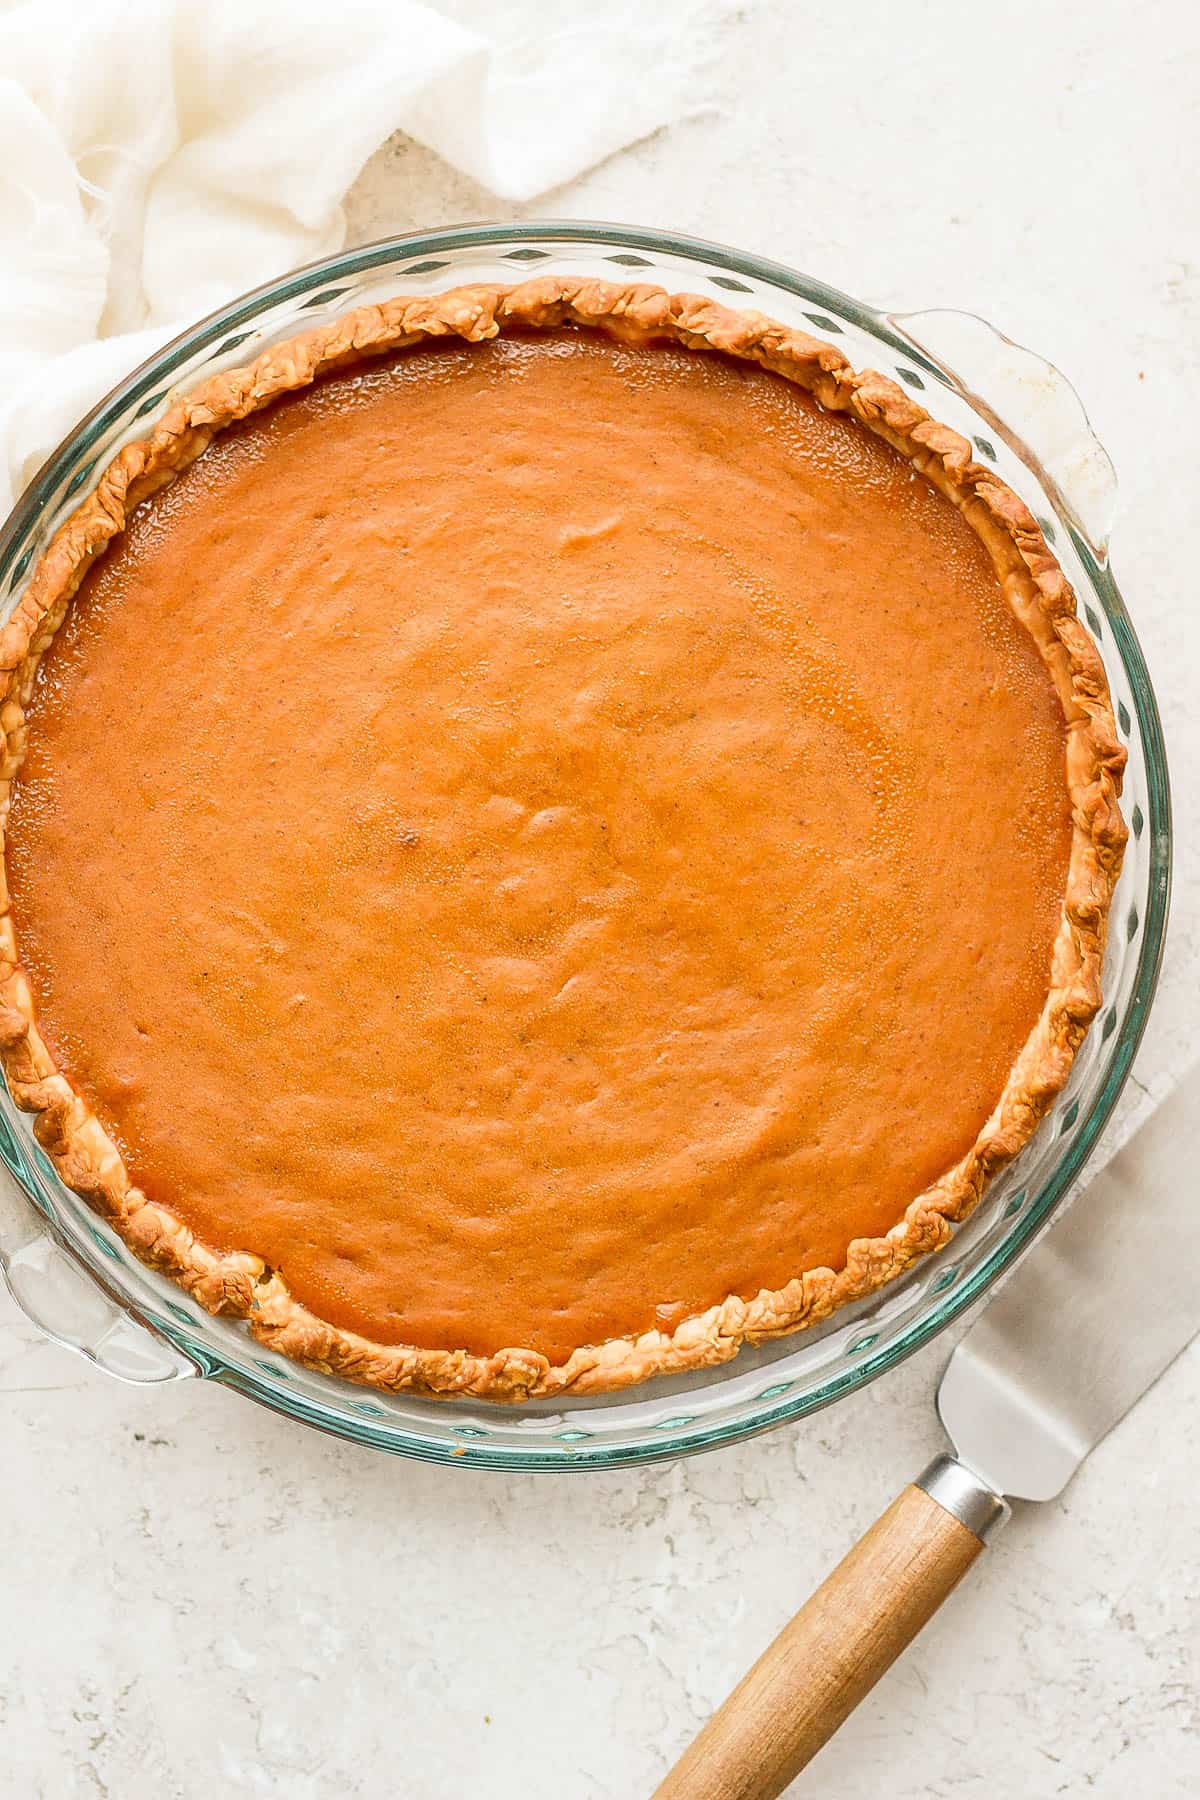 A fully cooked gluten free pumpkin pie in a glass pie pan.